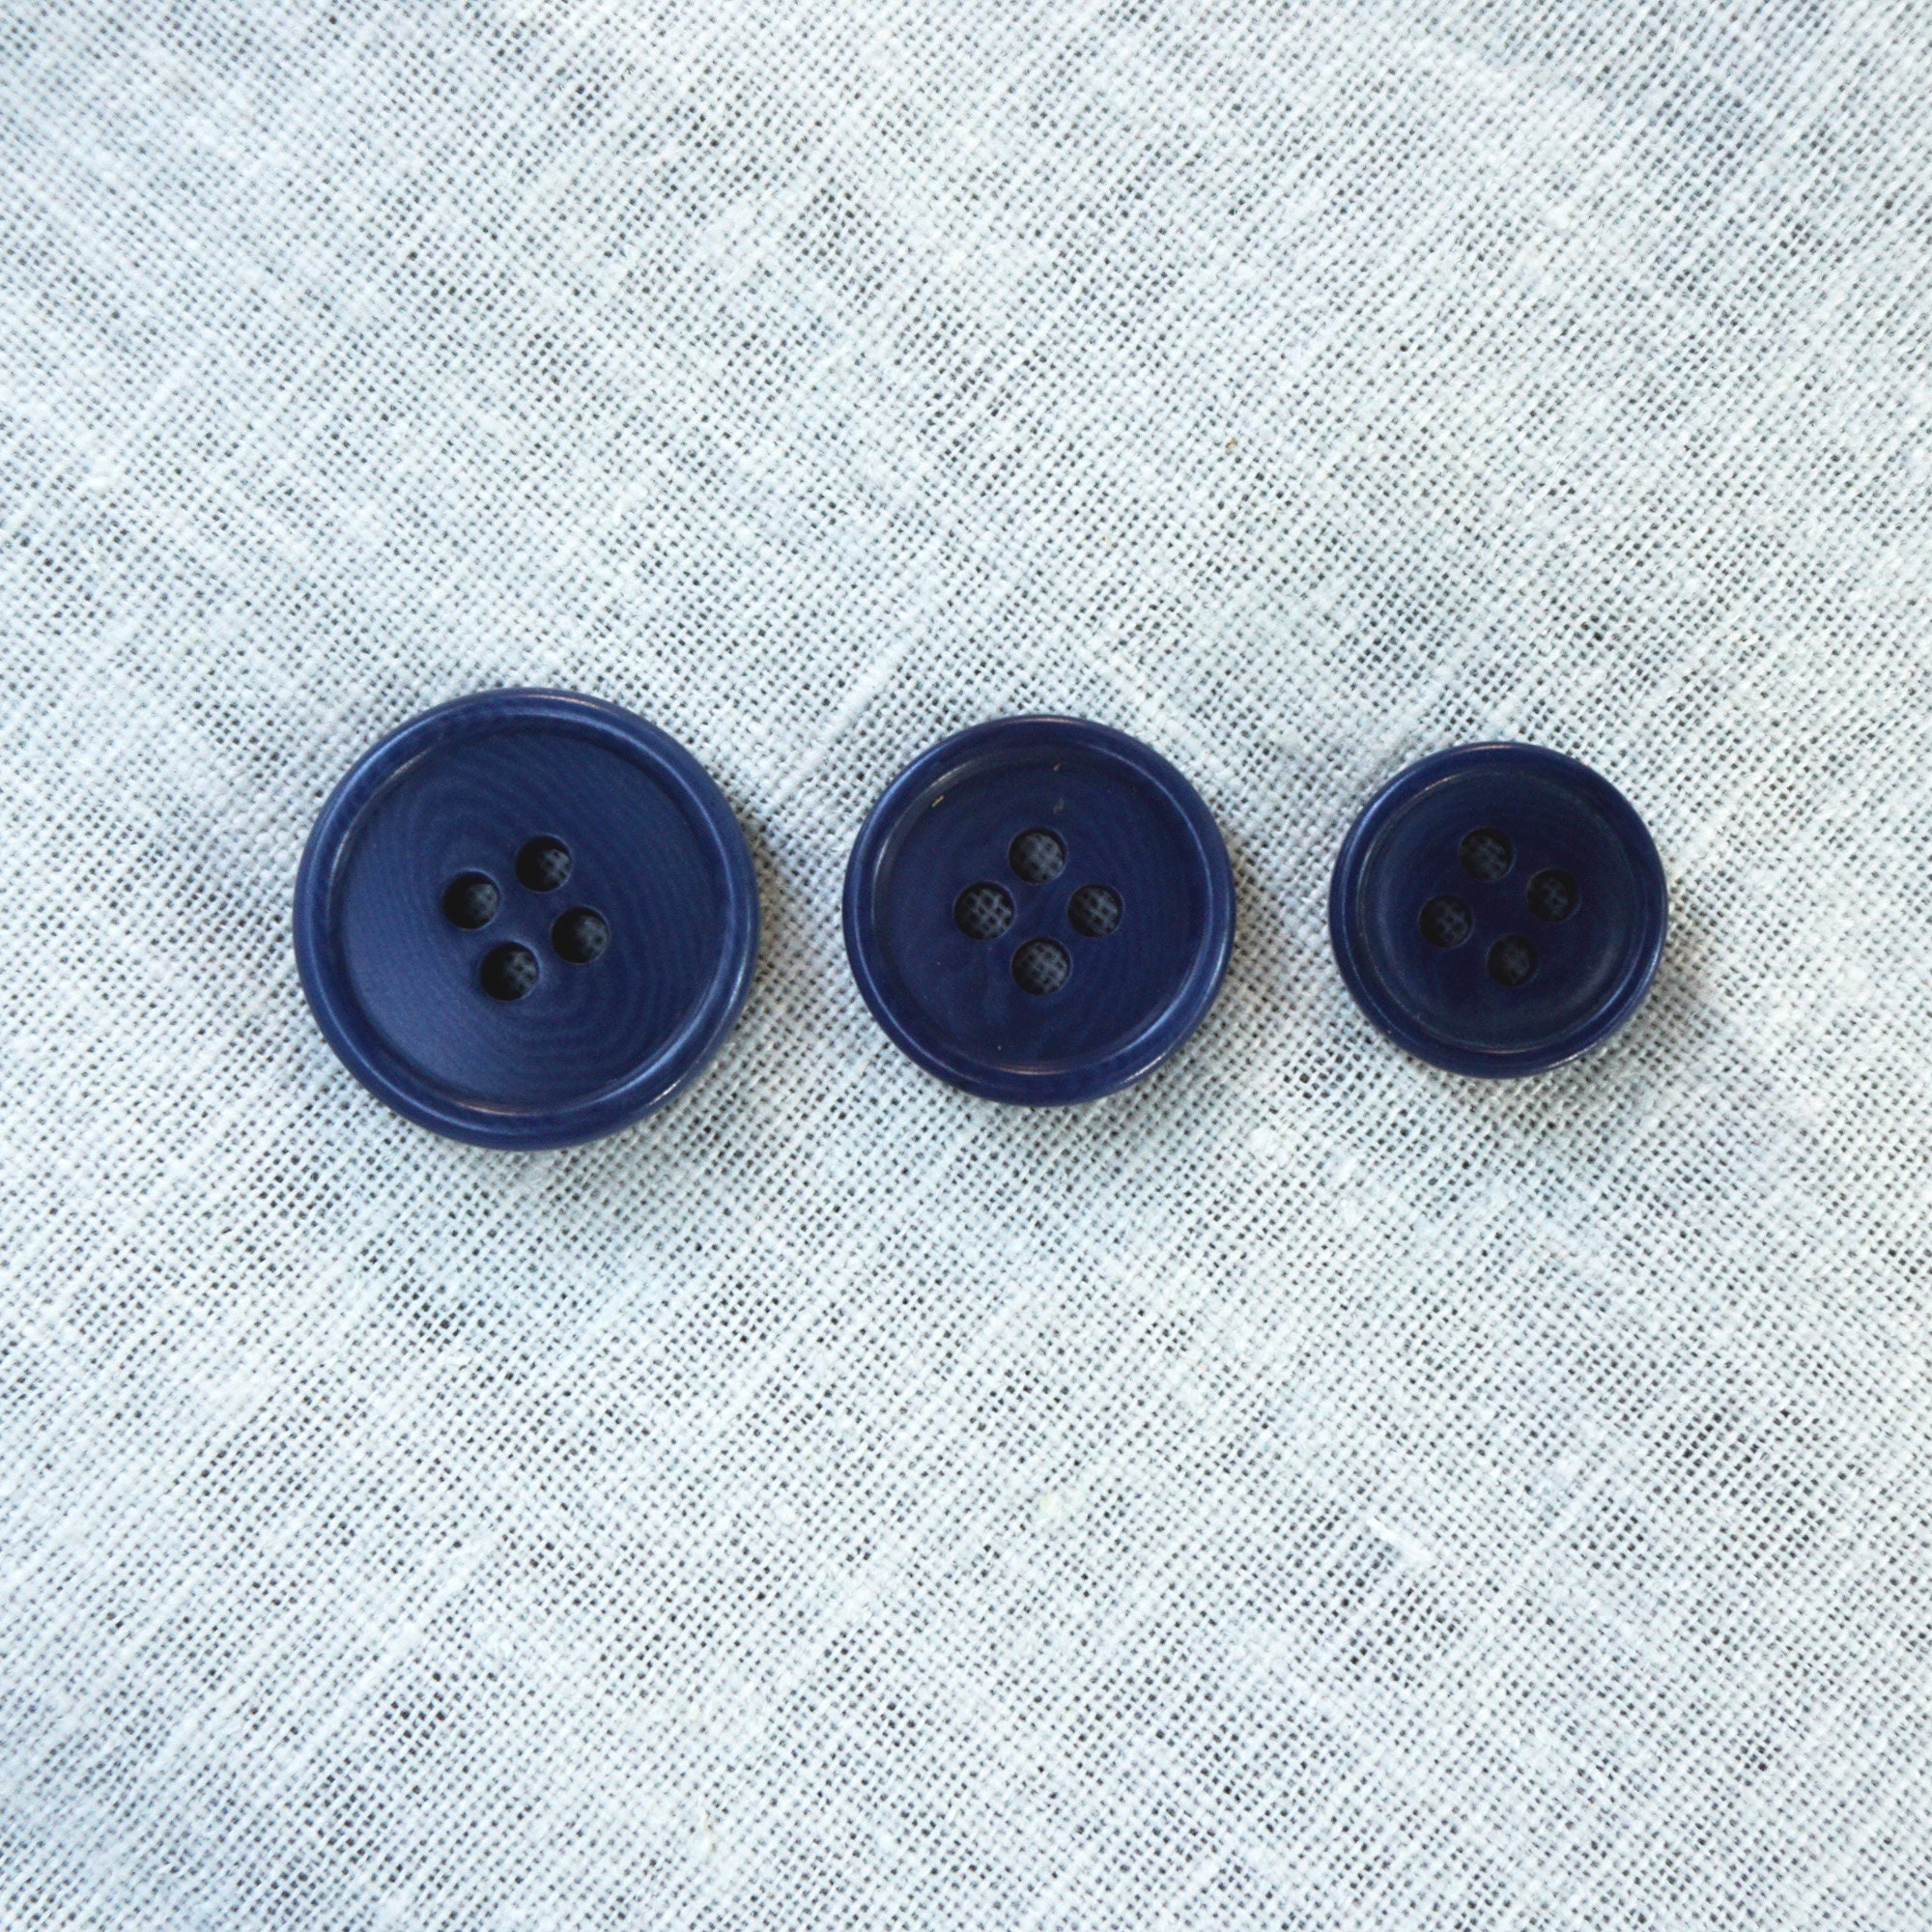 6 DARK NAVY VEGETABLE IVORY BUTTON ON CARD 1 1/8" QUANTITY DISCOUNT 